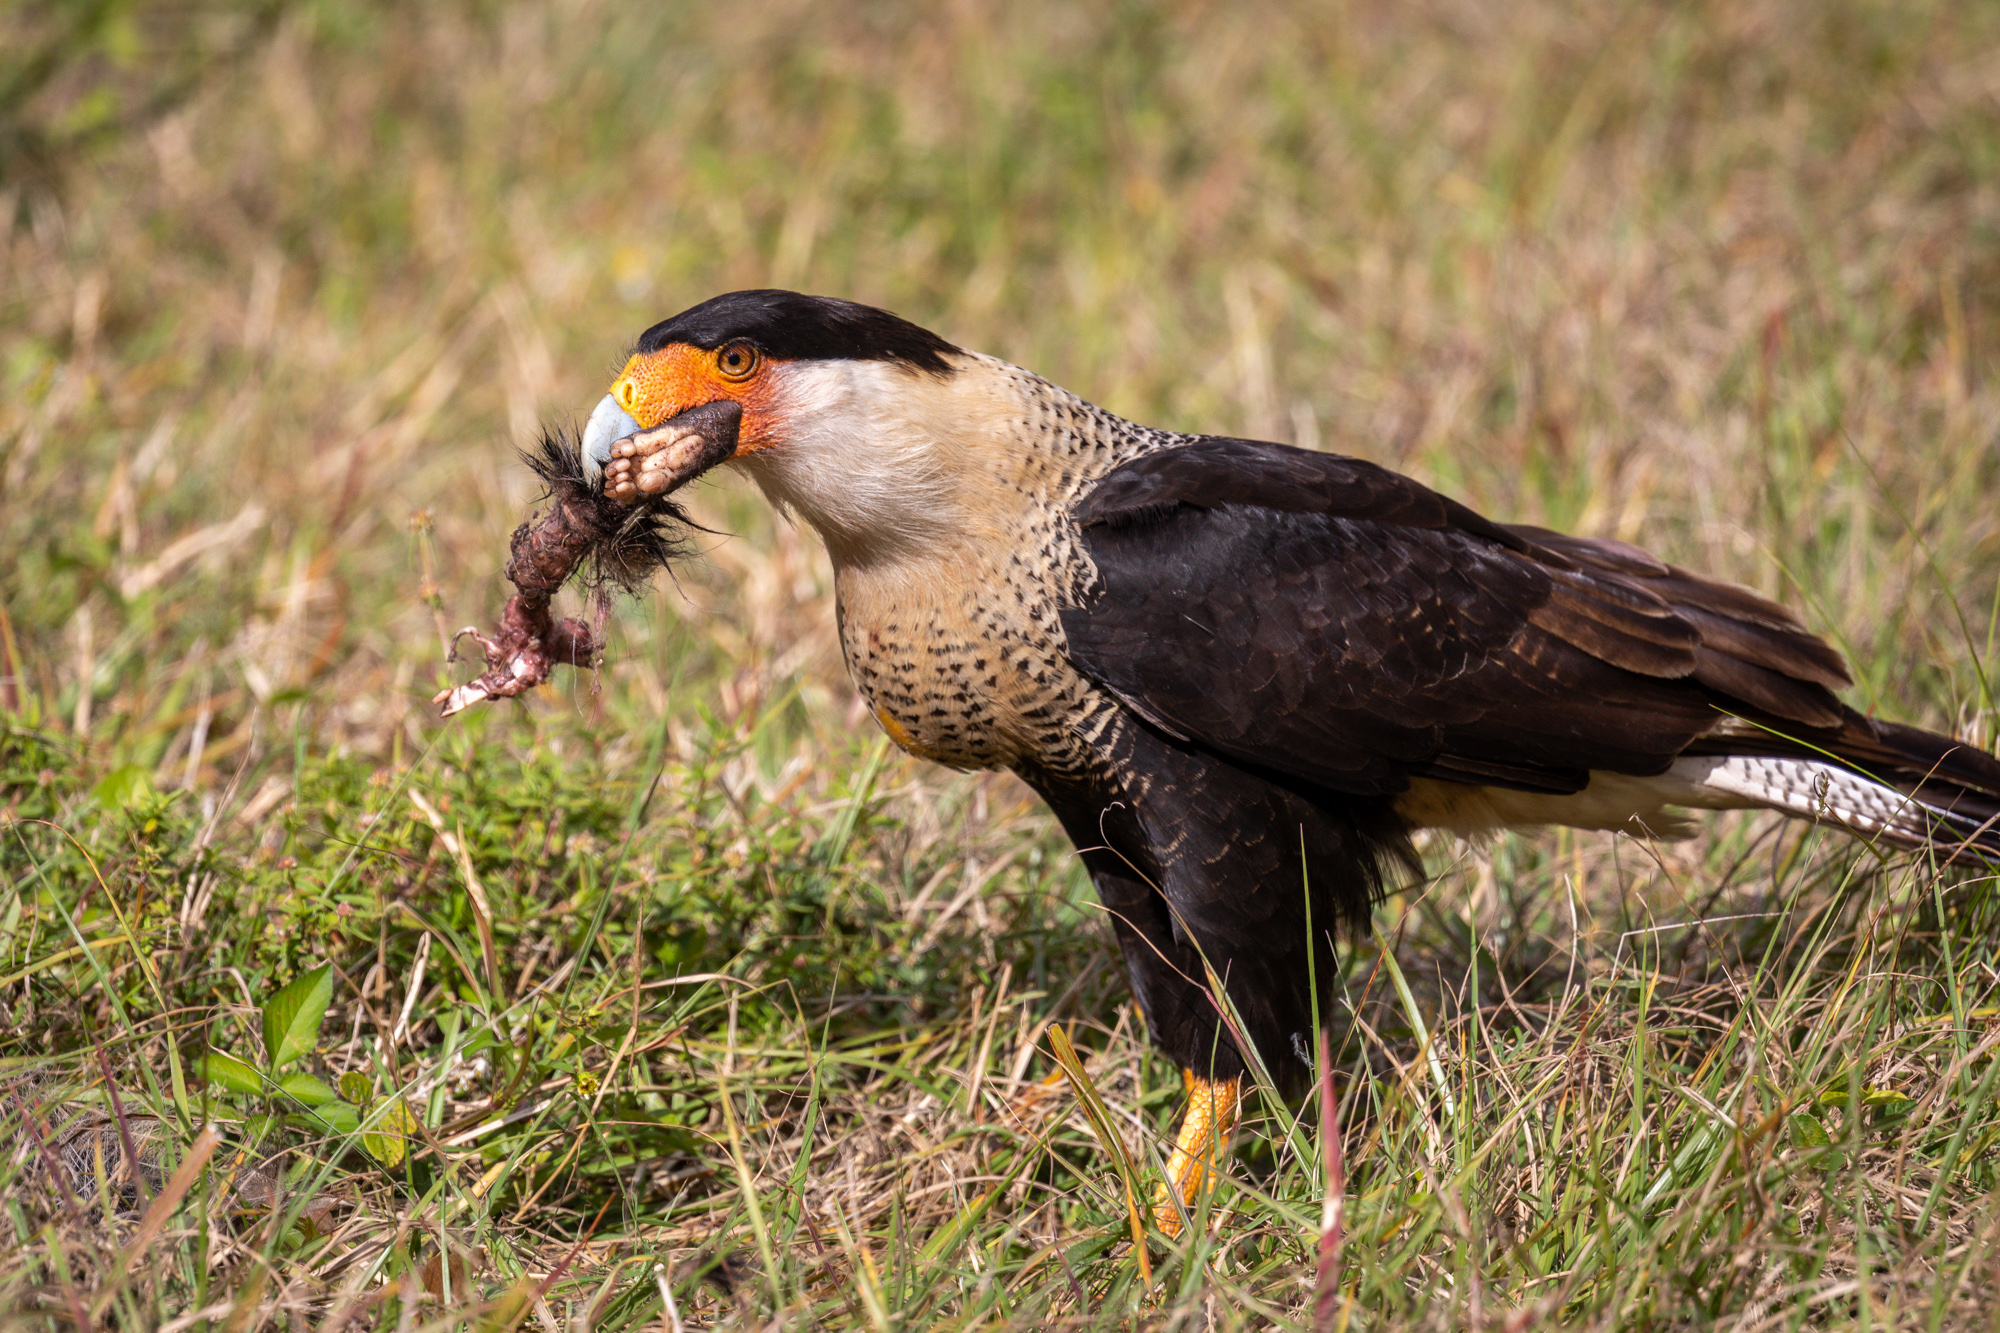 Crested Caracara with Roadkill Opossum